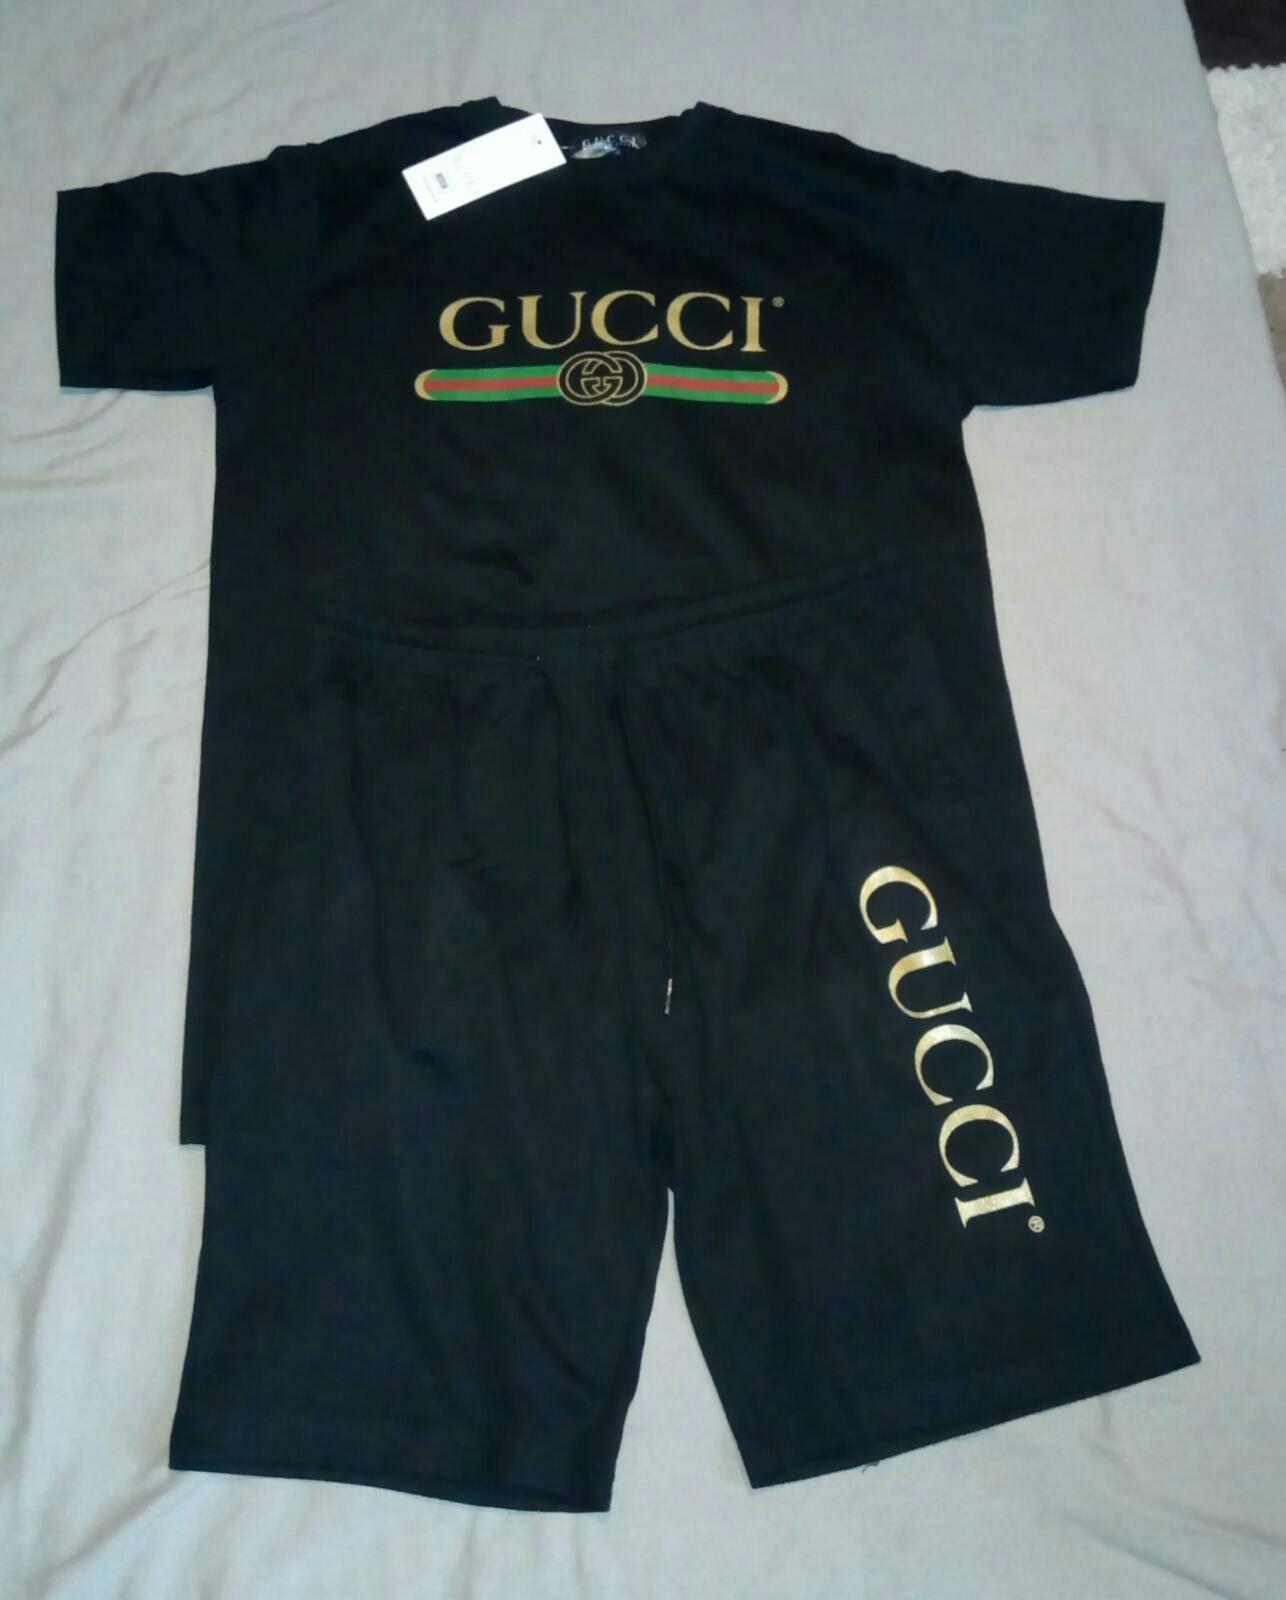 Gucci Clothes For Roblox Buyudum Cocuk Oldum - pictures of roblox gucci shirts